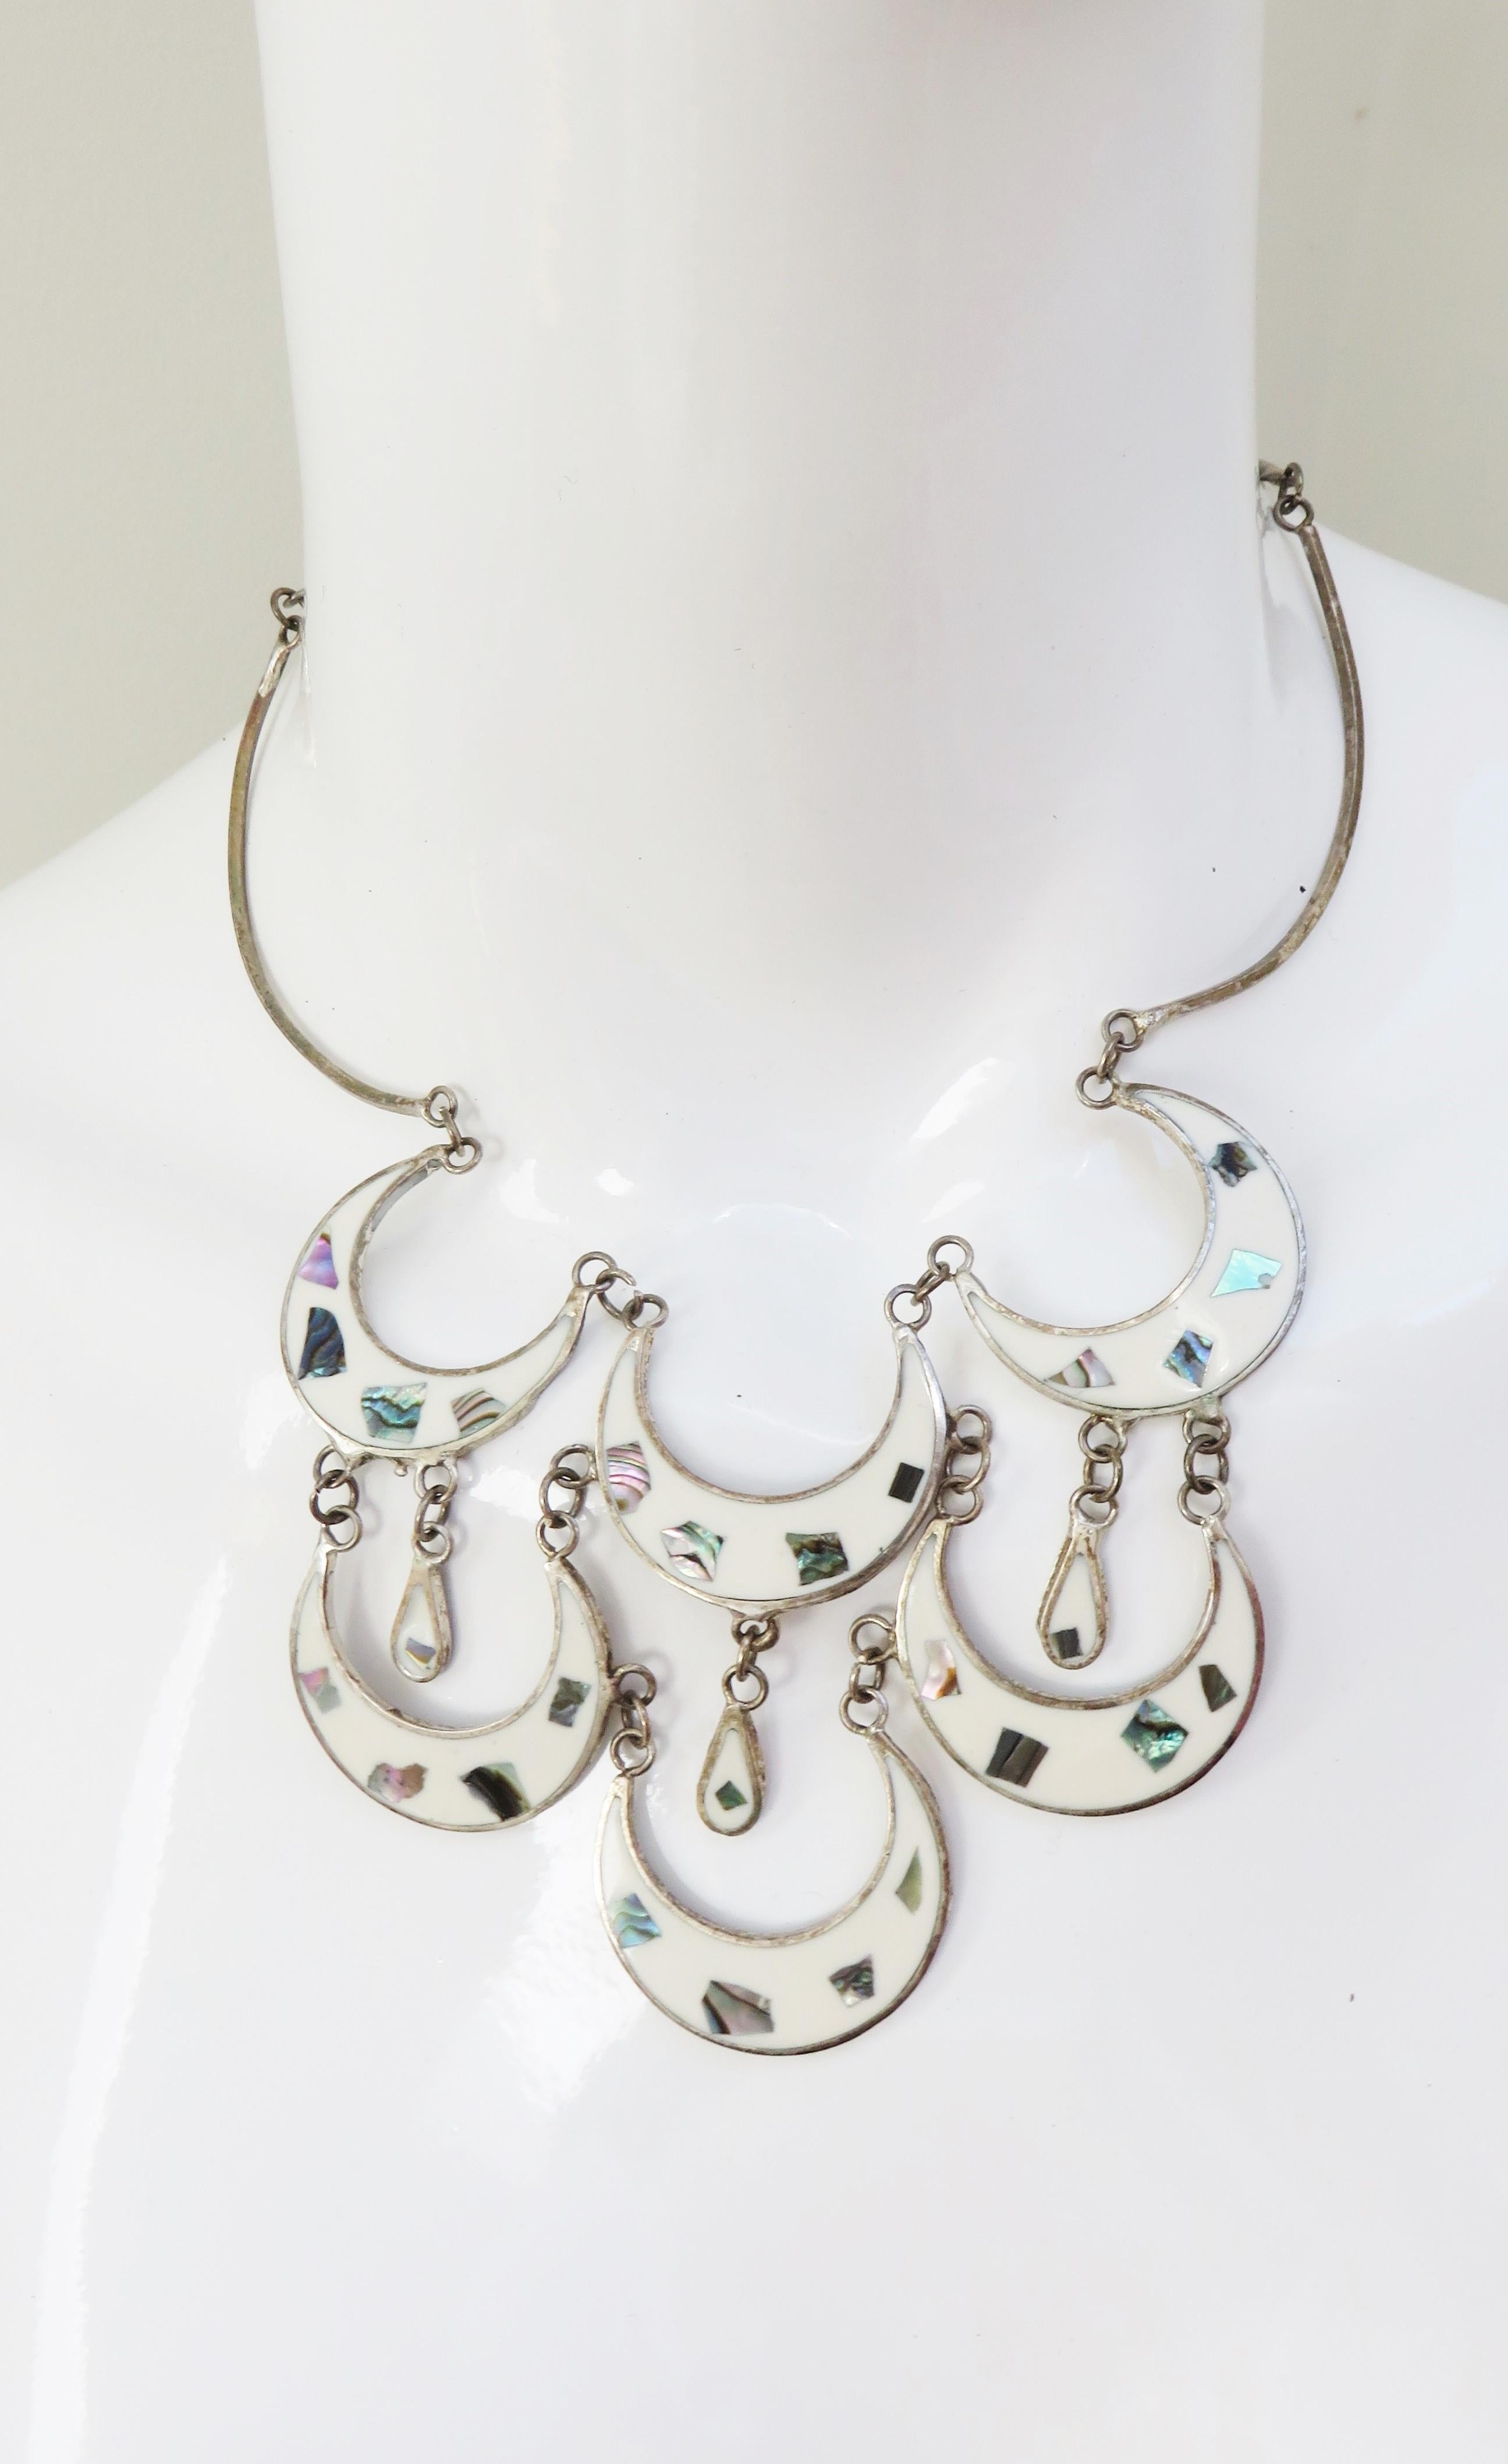 Women's Mexican Abalone Inlaid Silver Necklace and Pierced Earrings Set For Sale